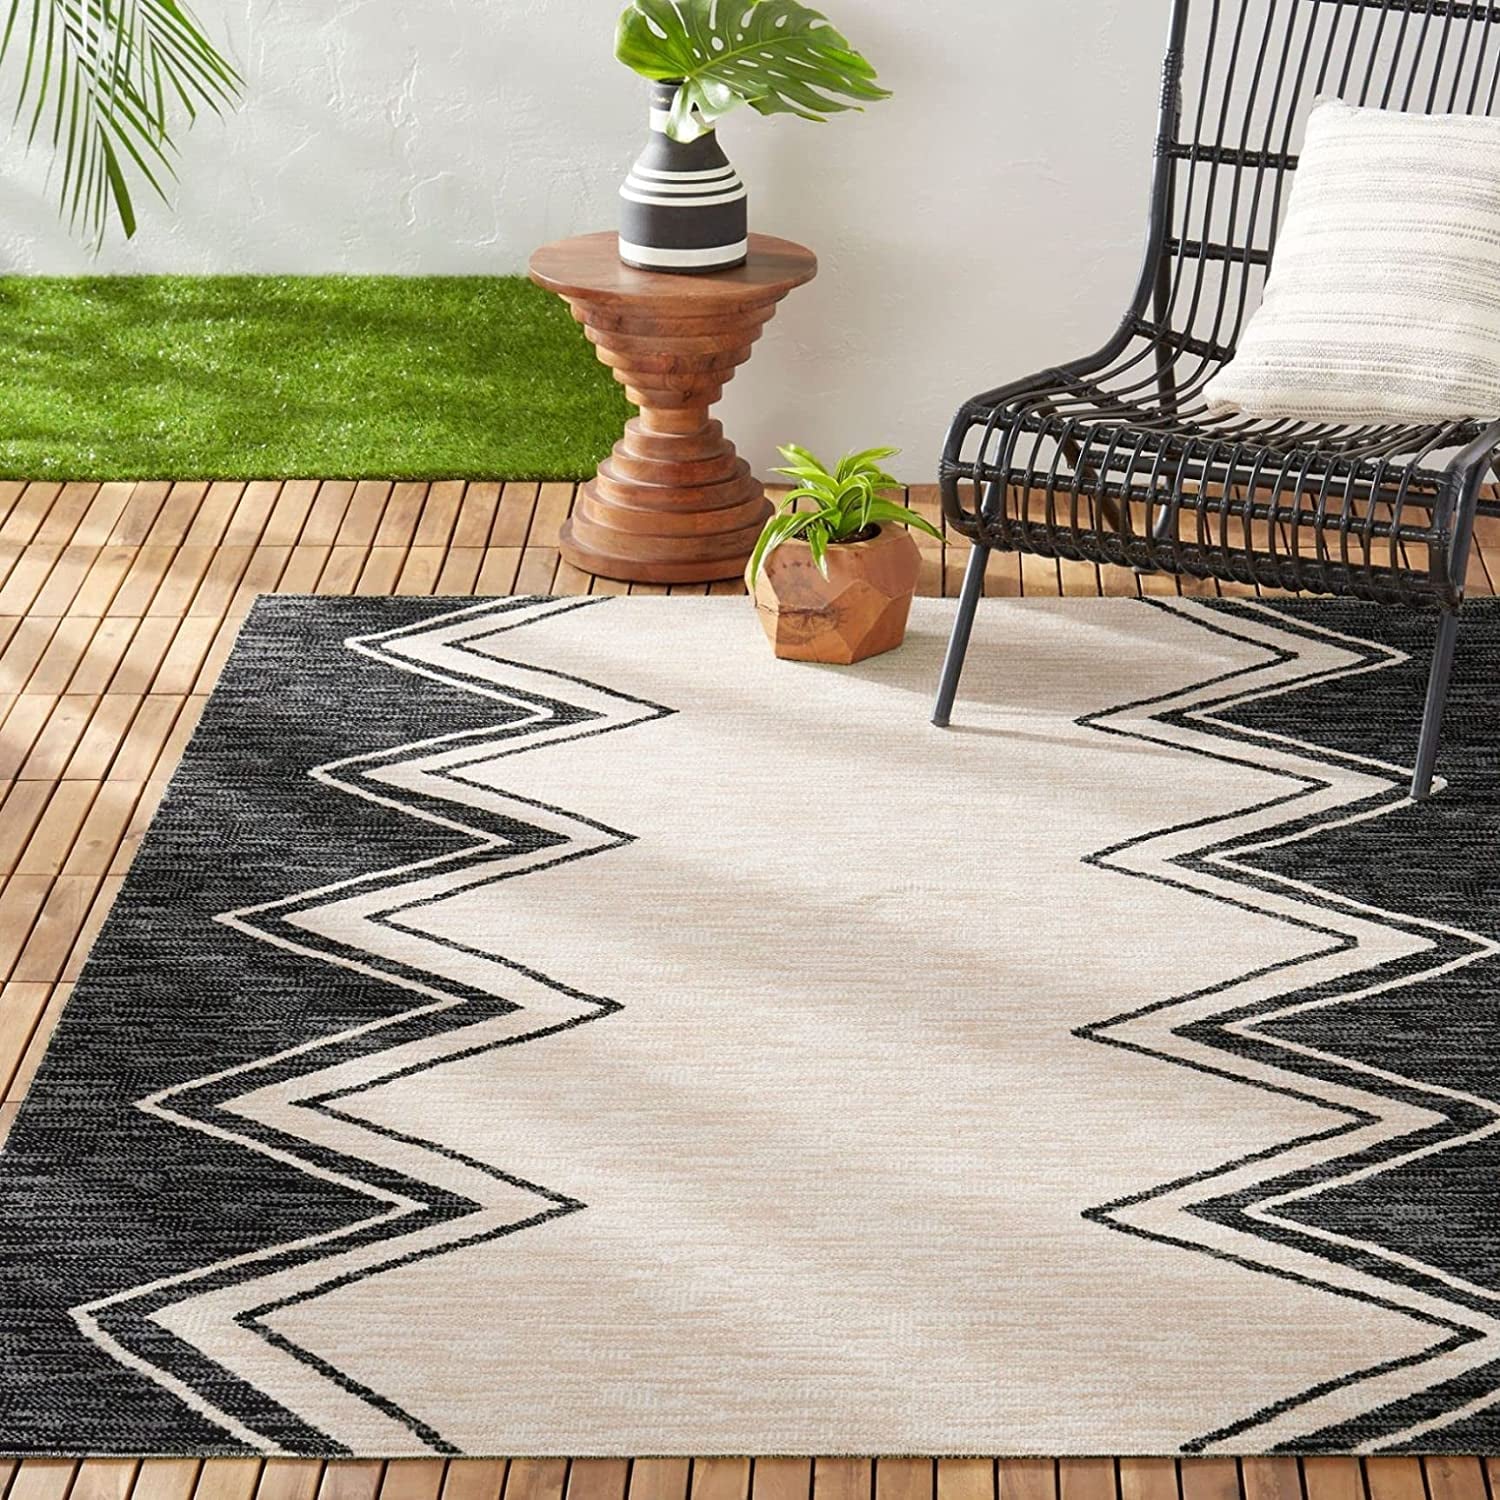 Outdoor Rugs for Every Design Style